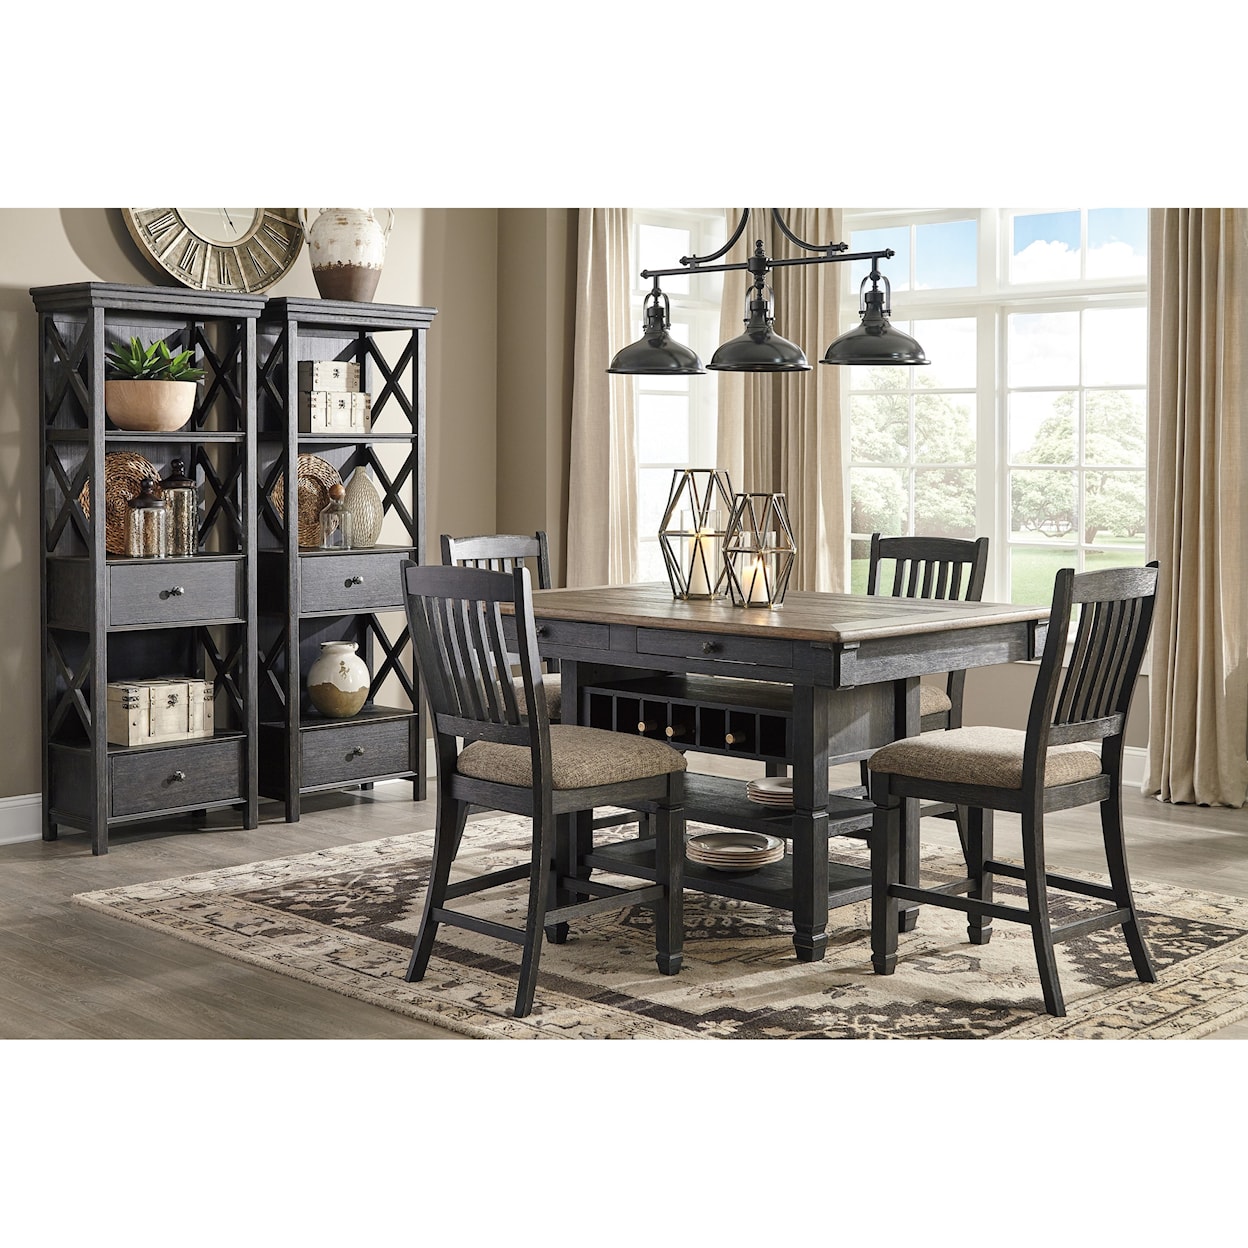 Signature Design by Ashley Tory Casual Dining Room Group